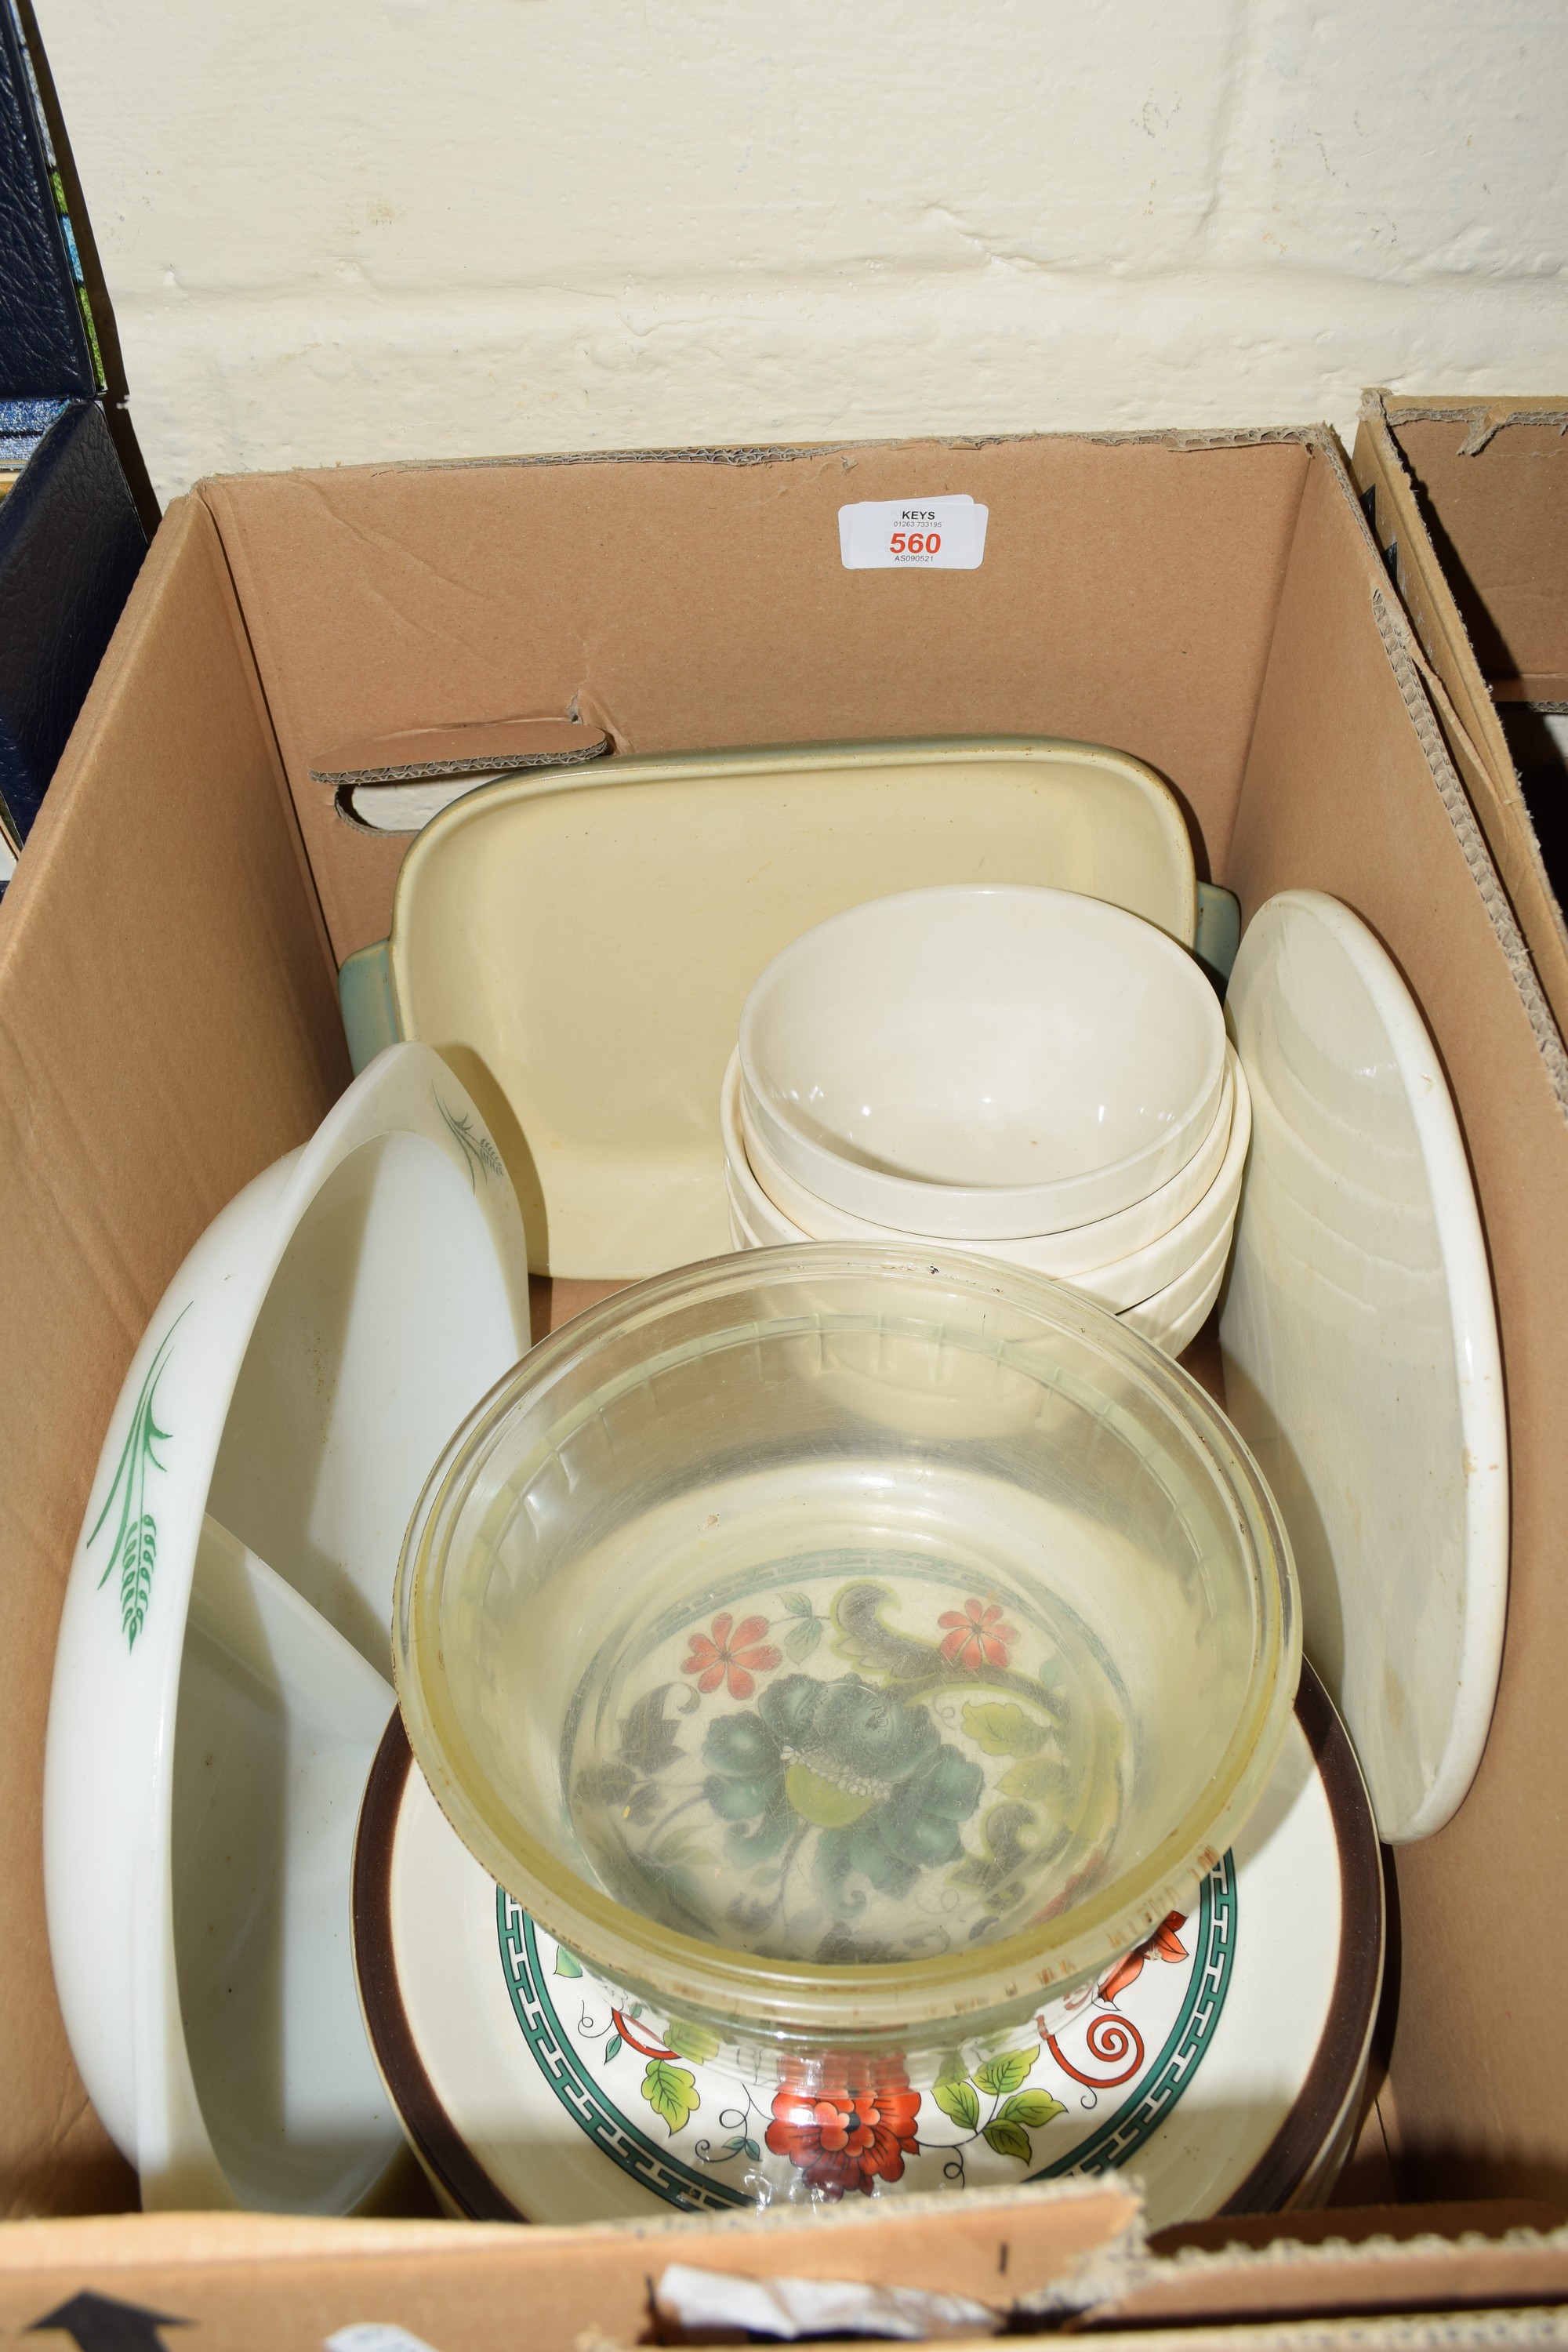 BOX CONTAINING HOUSEHOLD KITCHEN ITEMS